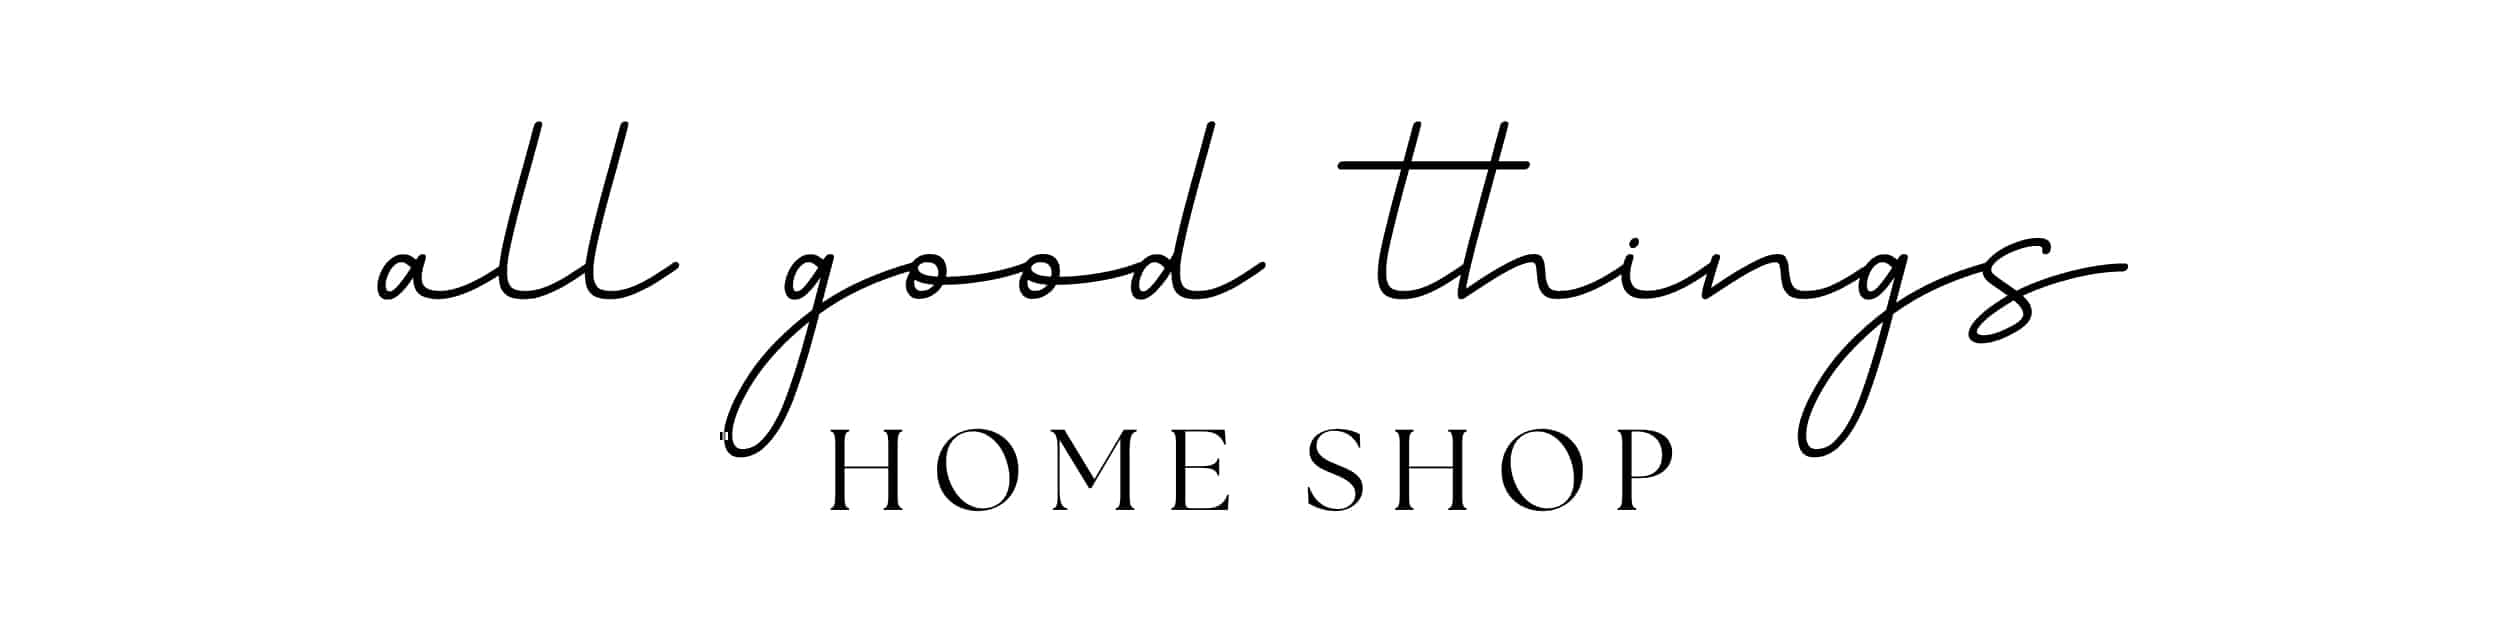 Furniture: All Good Things Home Shop